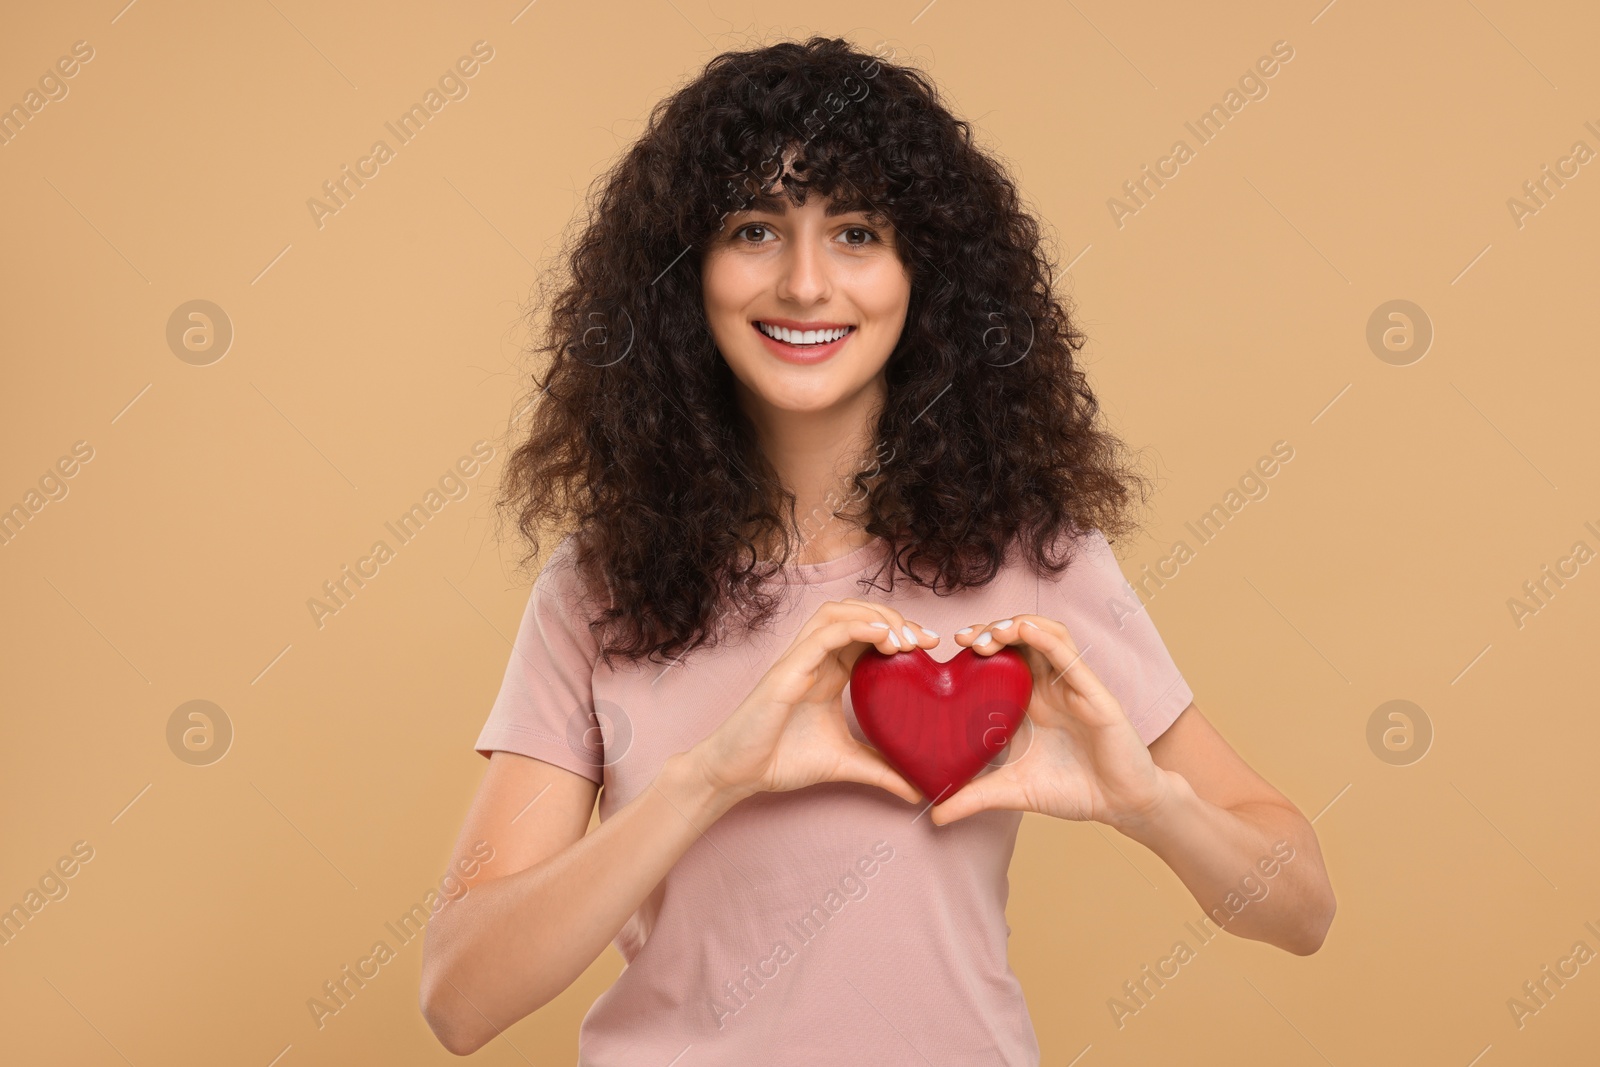 Photo of Happy young woman holding decorative red heart on beige background